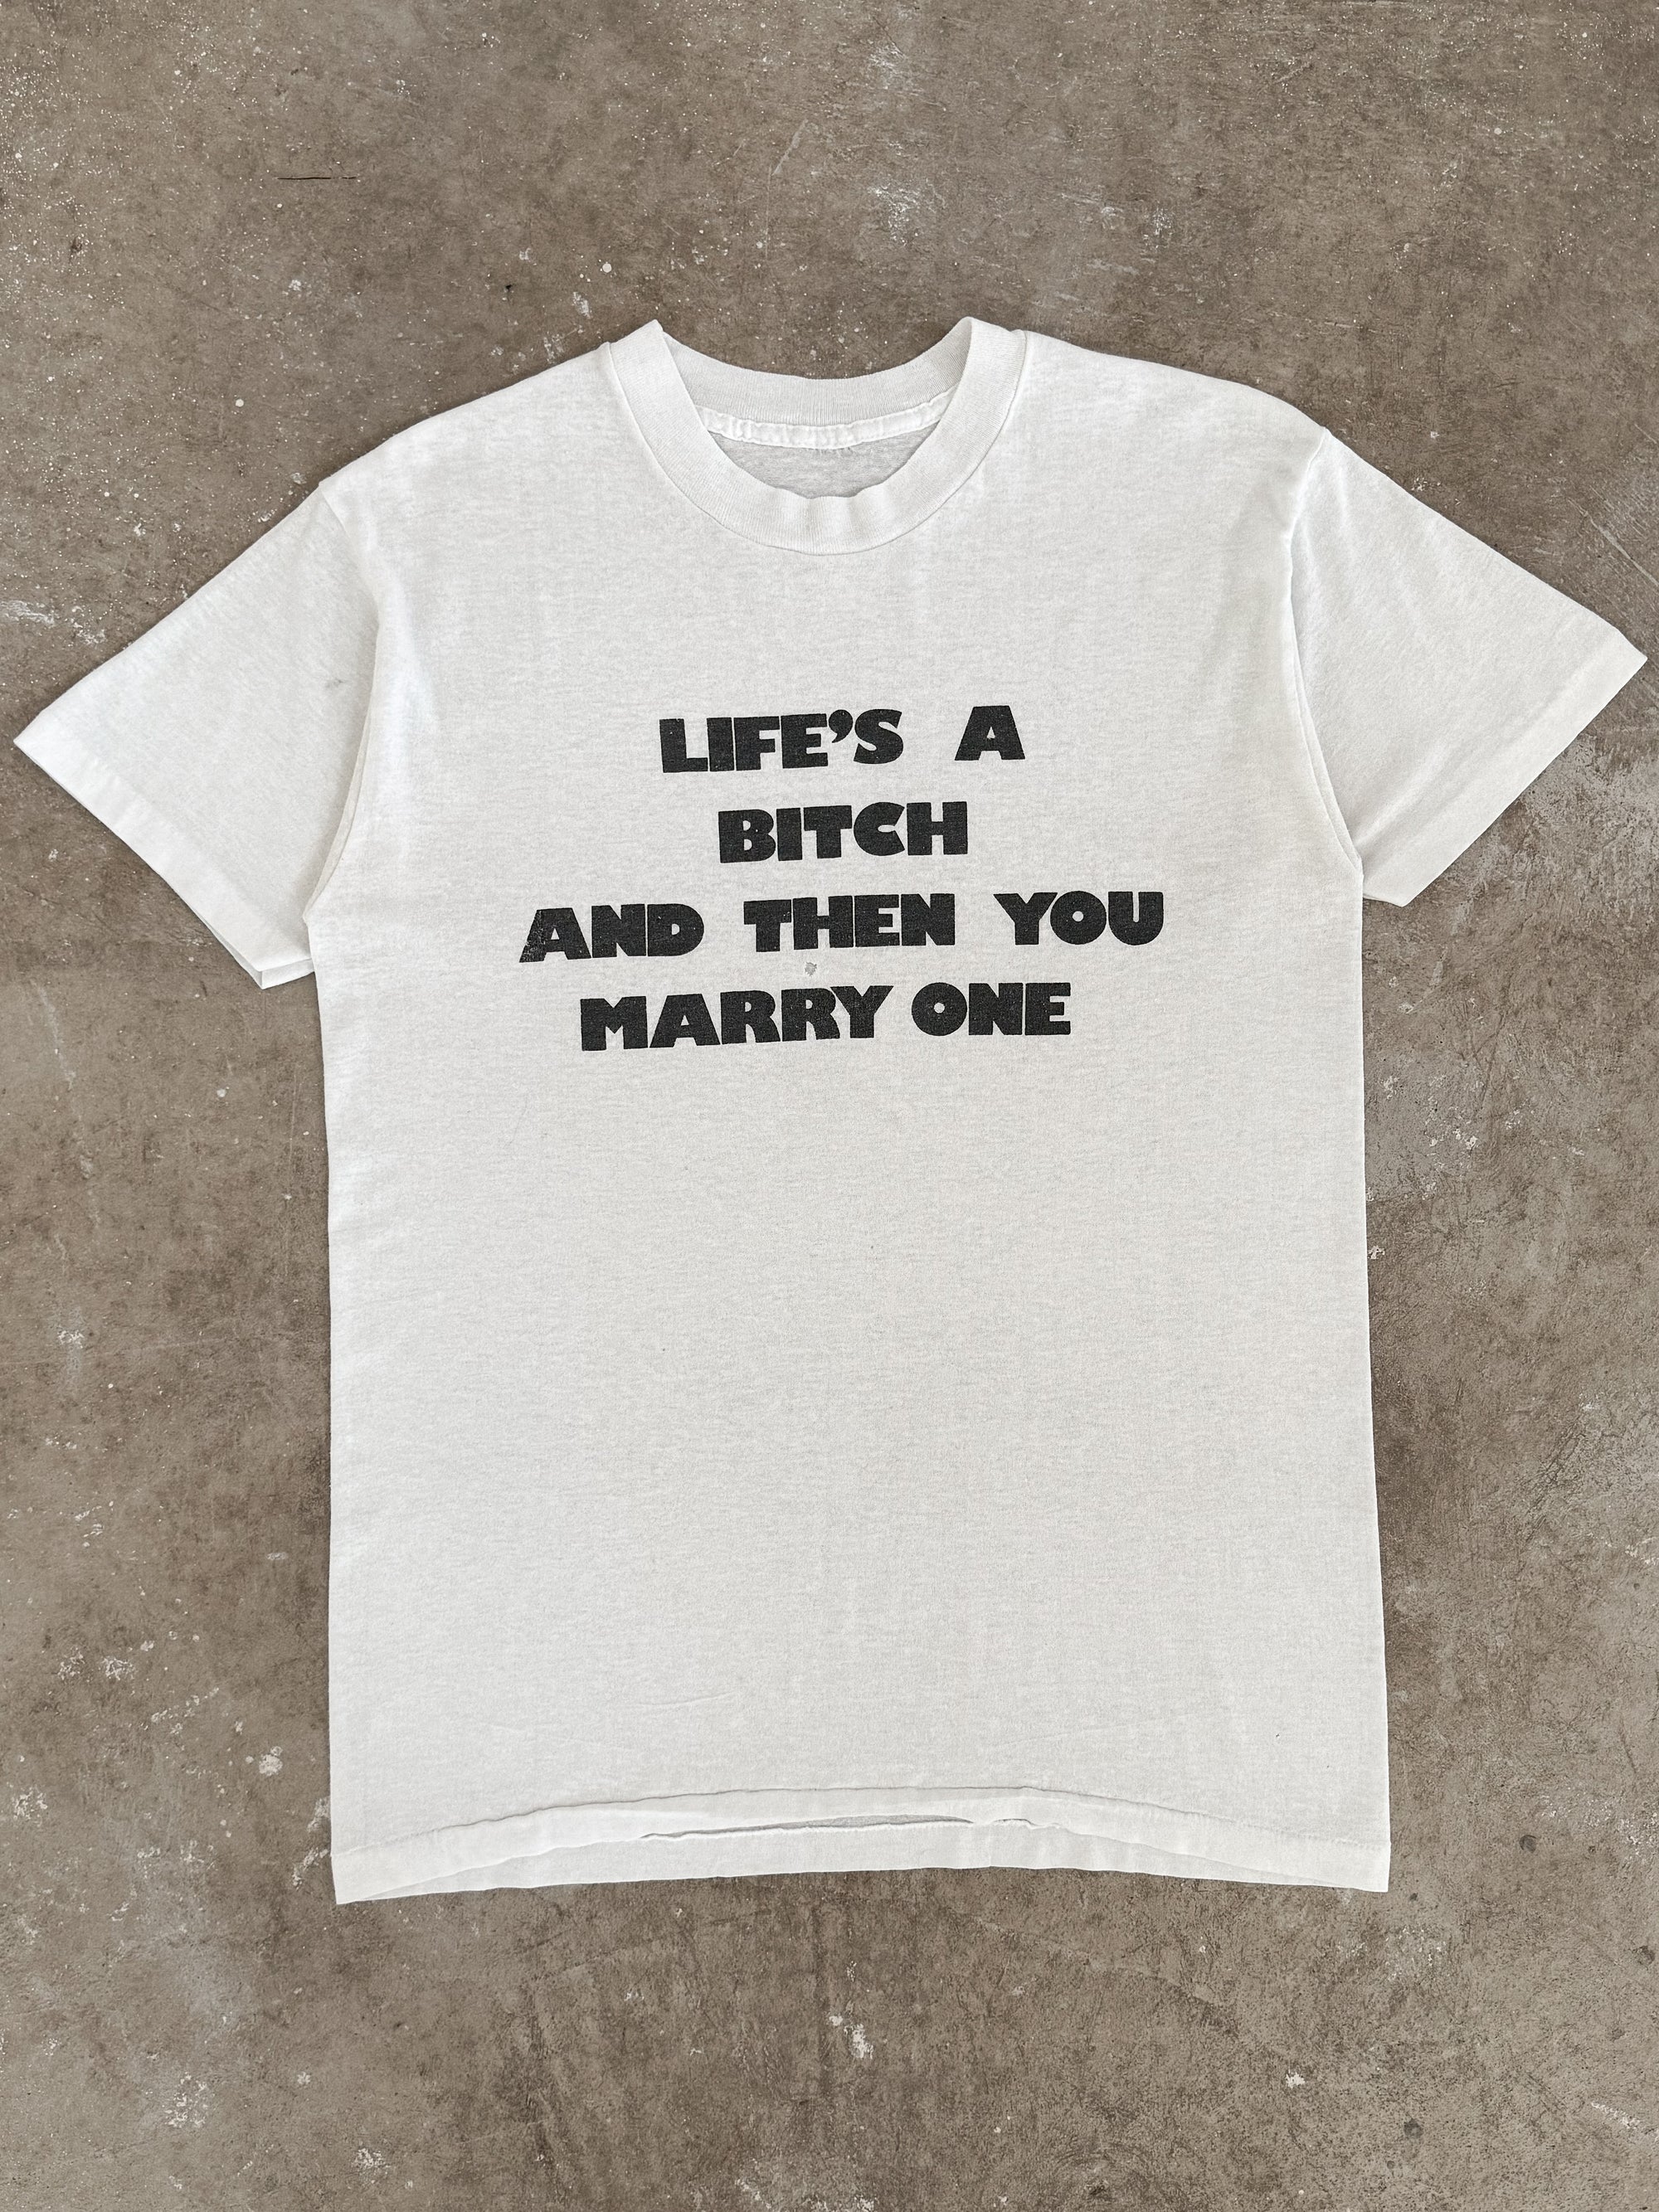 1980s "Life's A Bitch And Then Your Marry One" Tee (S/M)